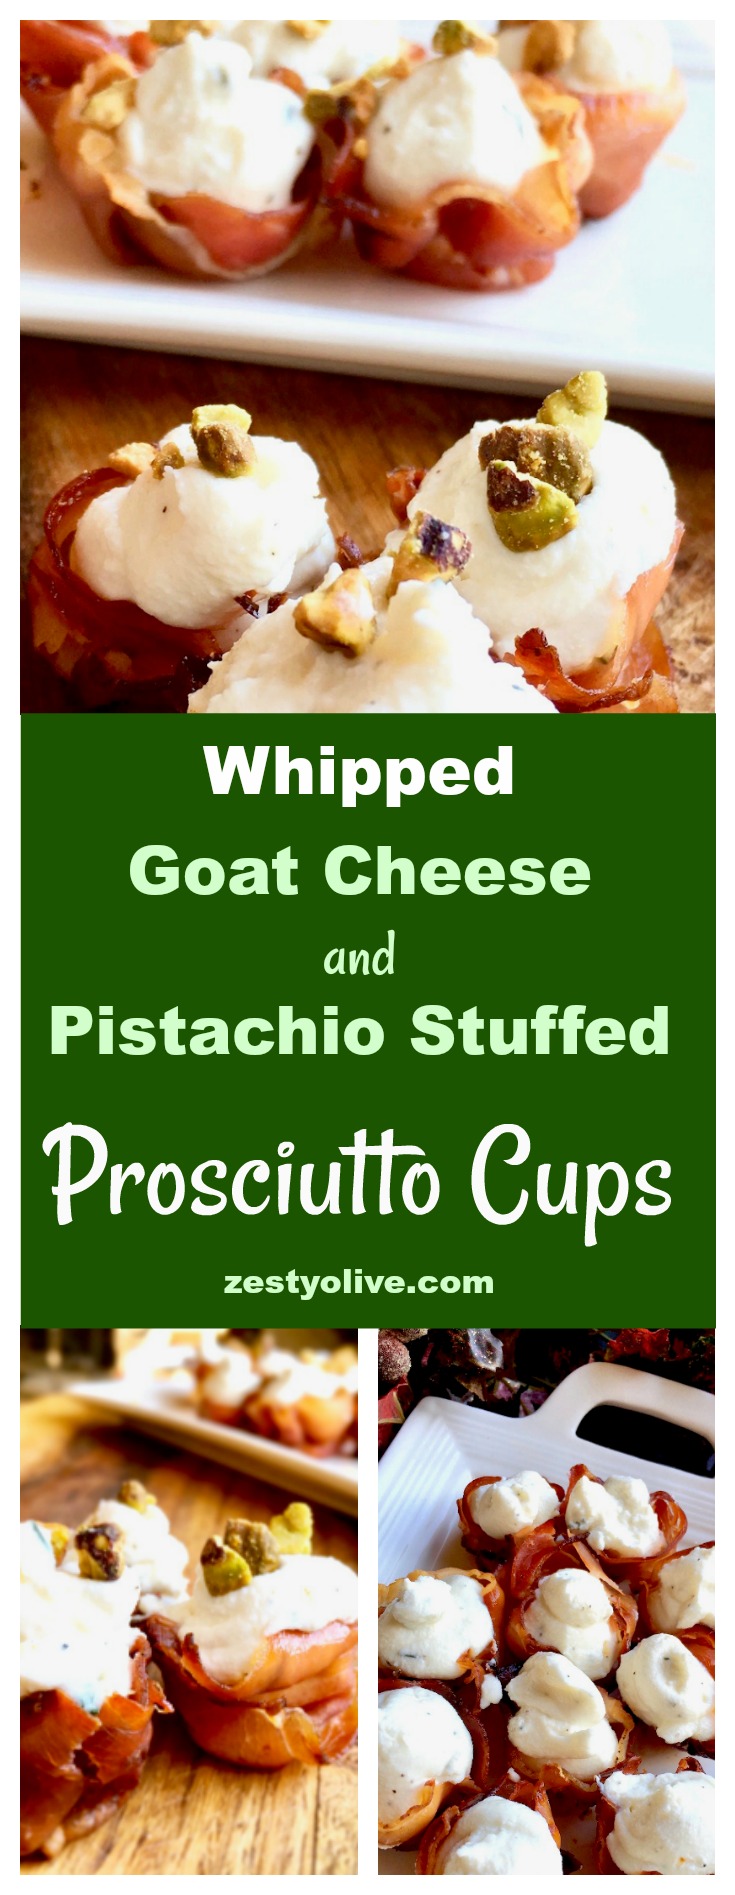 Impress your guests with this elegant, yet easy appetizer of whipped goat cheese stuffed prosciutto cups topped with crushed pistachios.